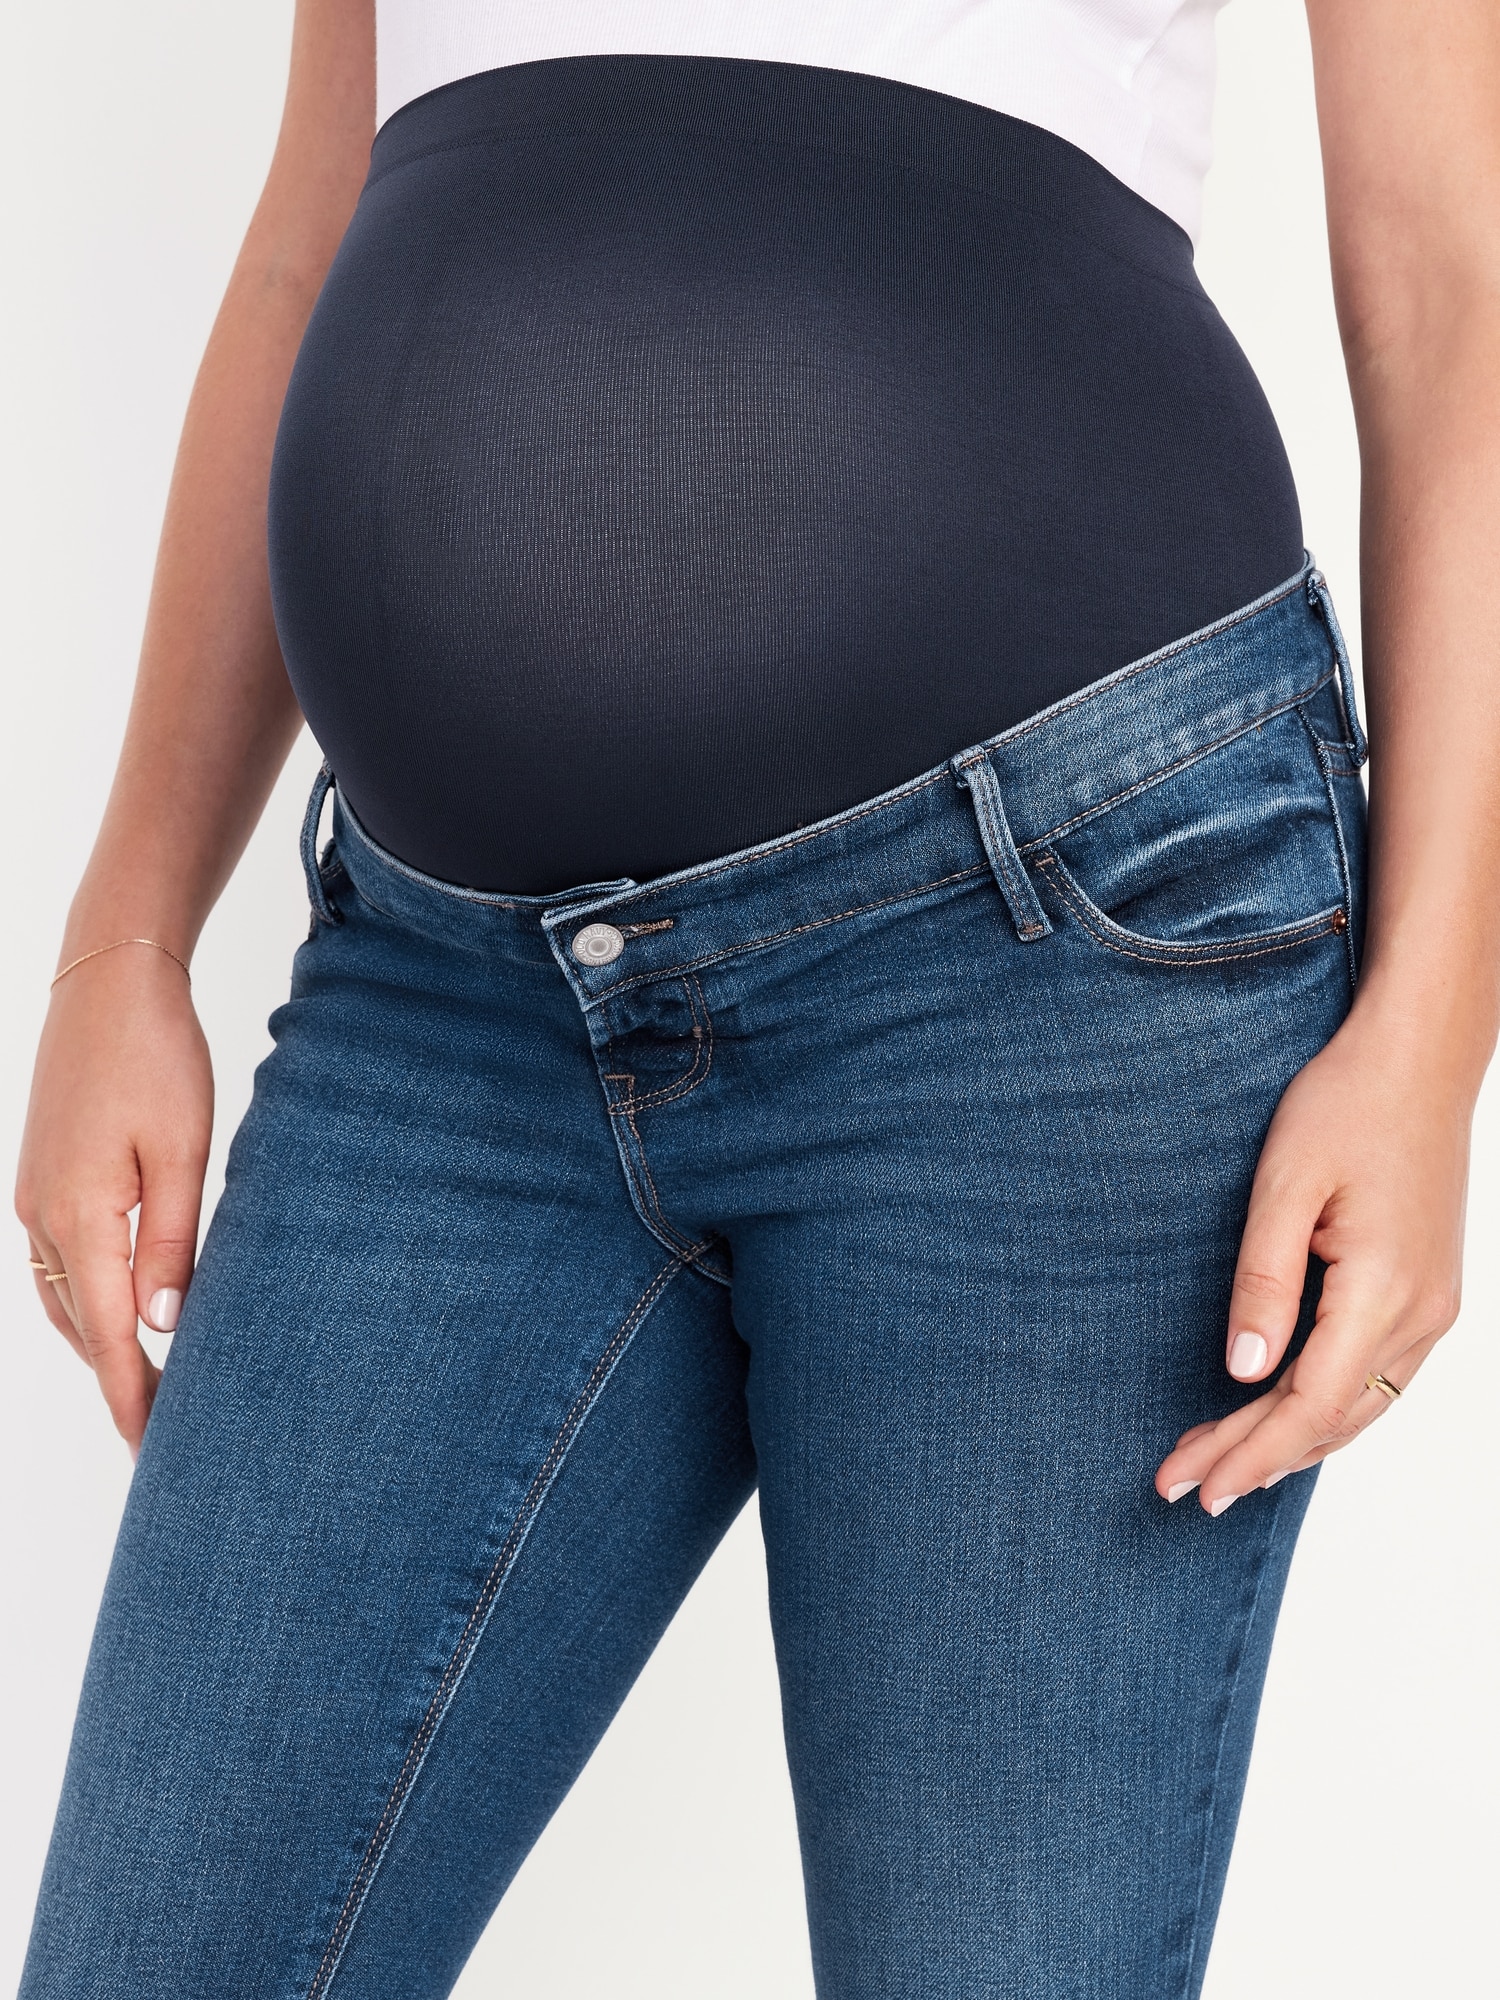 Topshop Maternity Maternity Jeans, 8 – Stella has a Baby